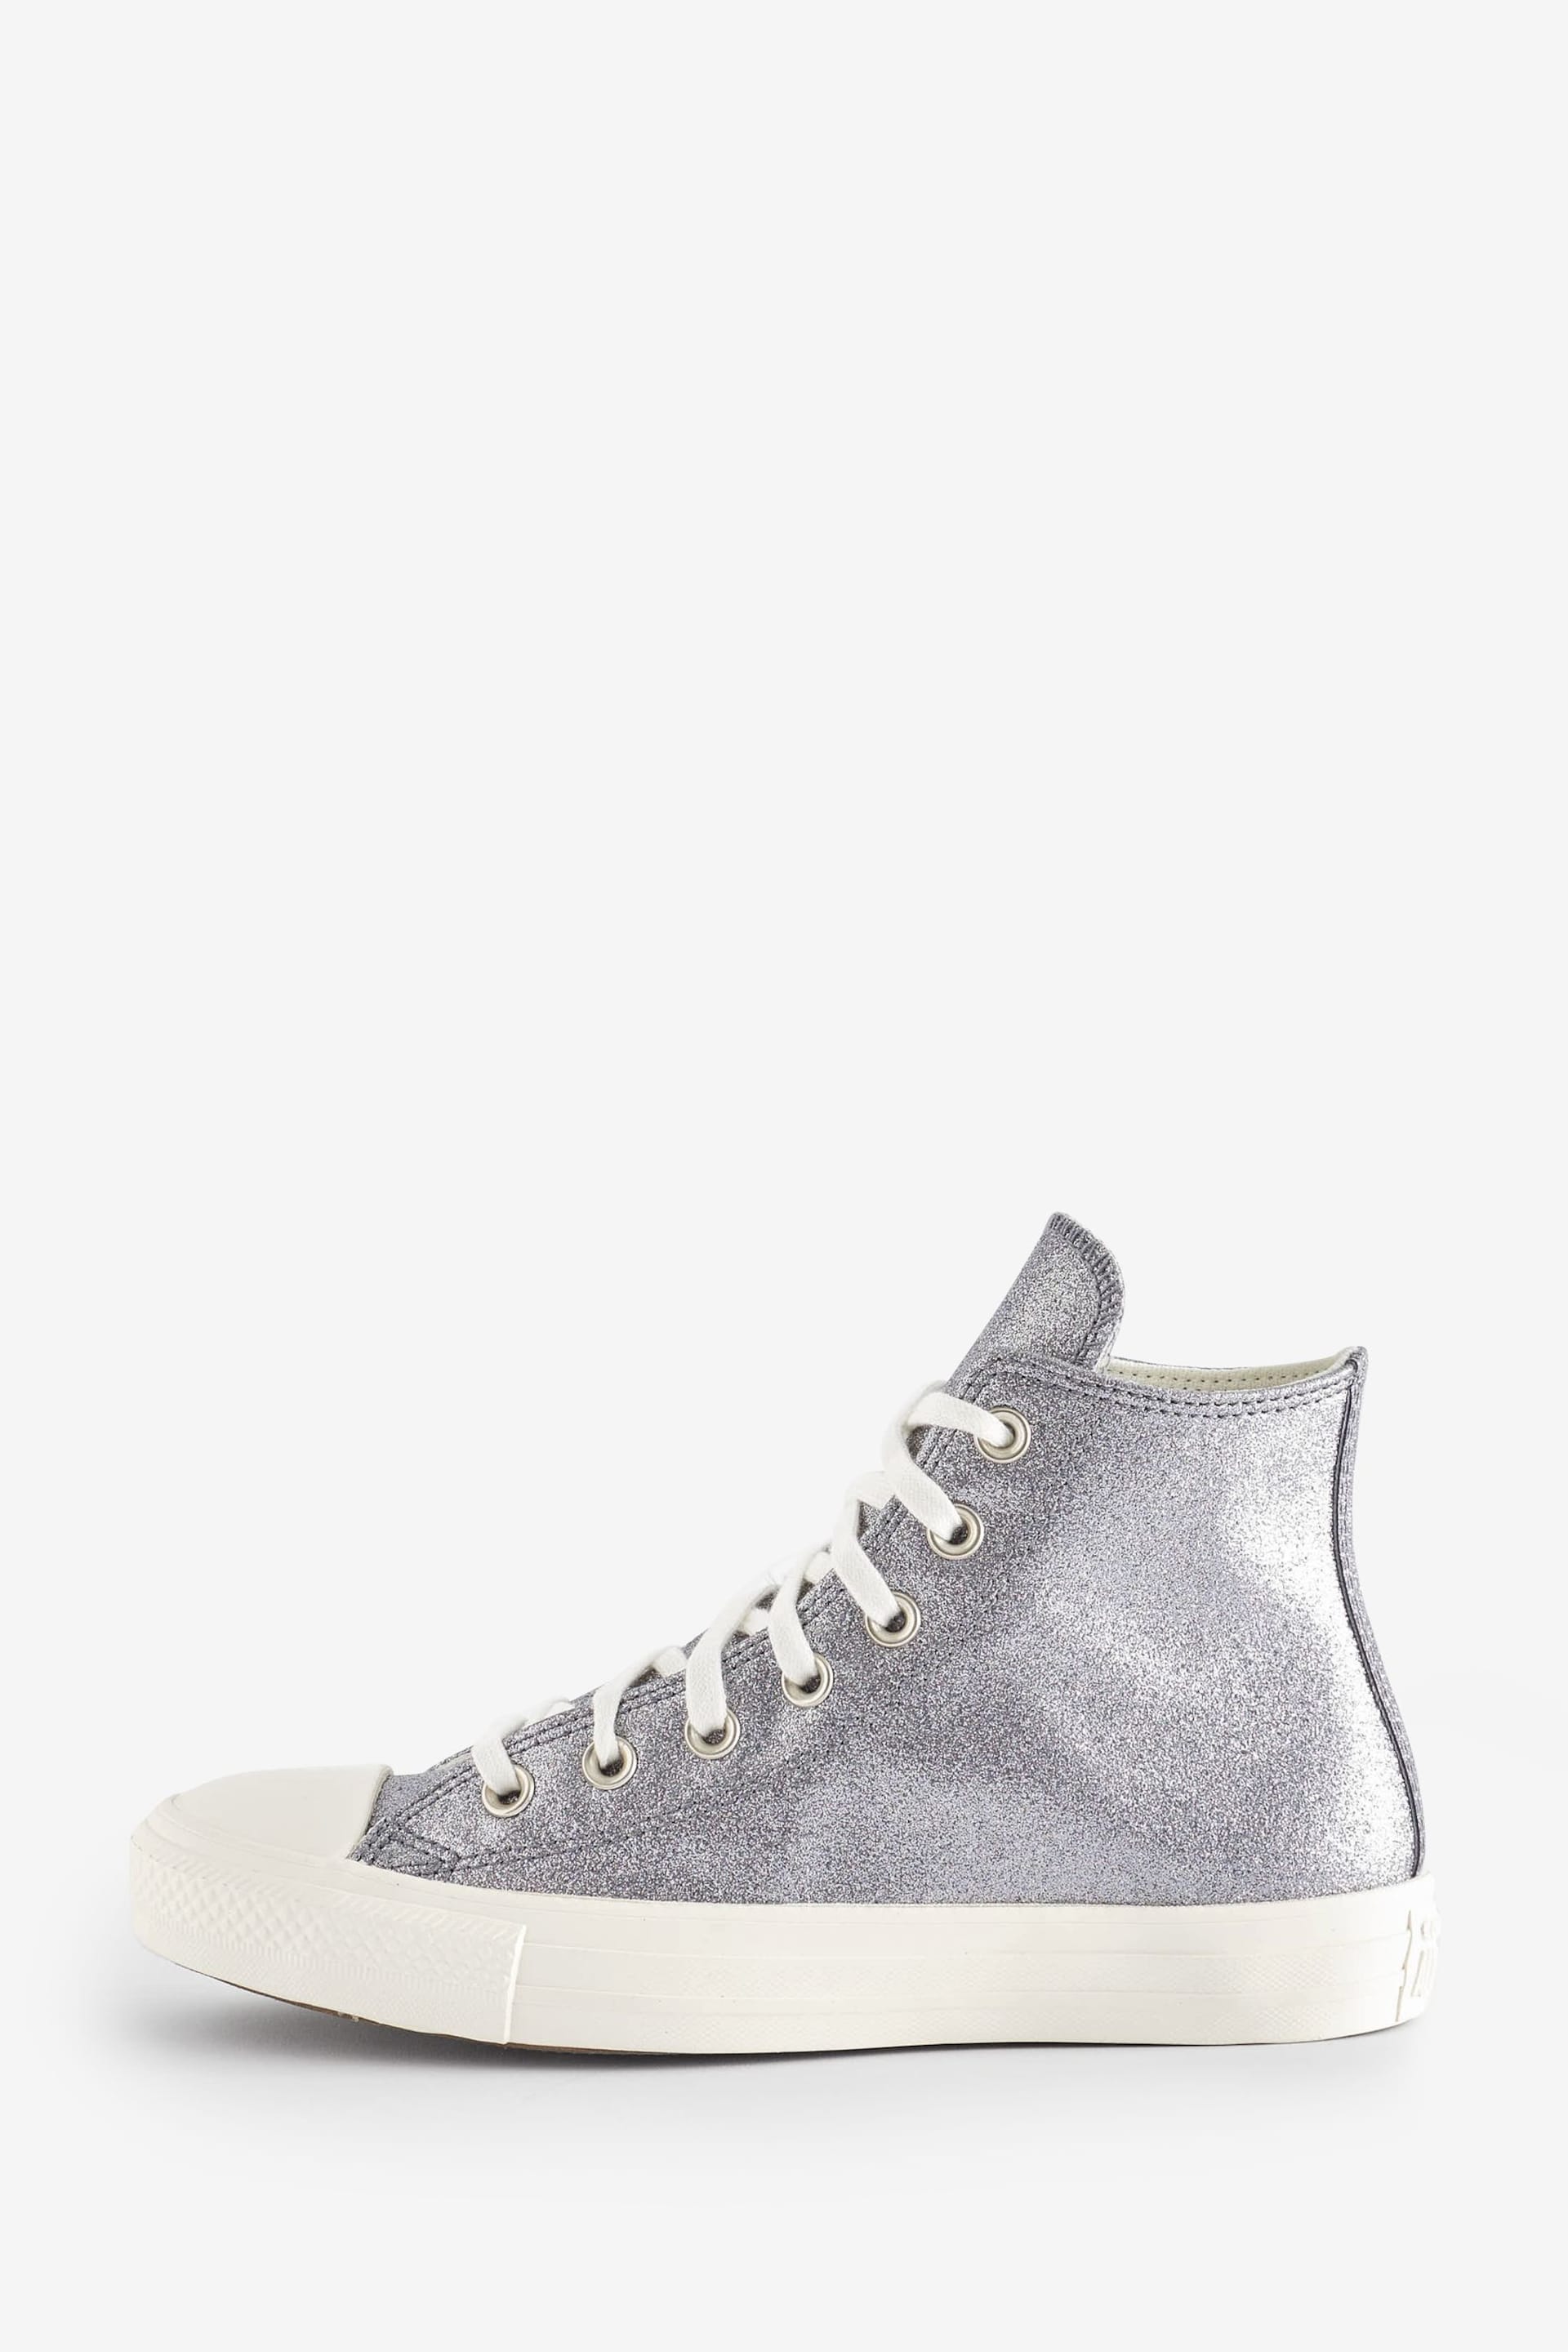 Converse Silver Silver Glitter High Top Trainers - Image 2 of 9